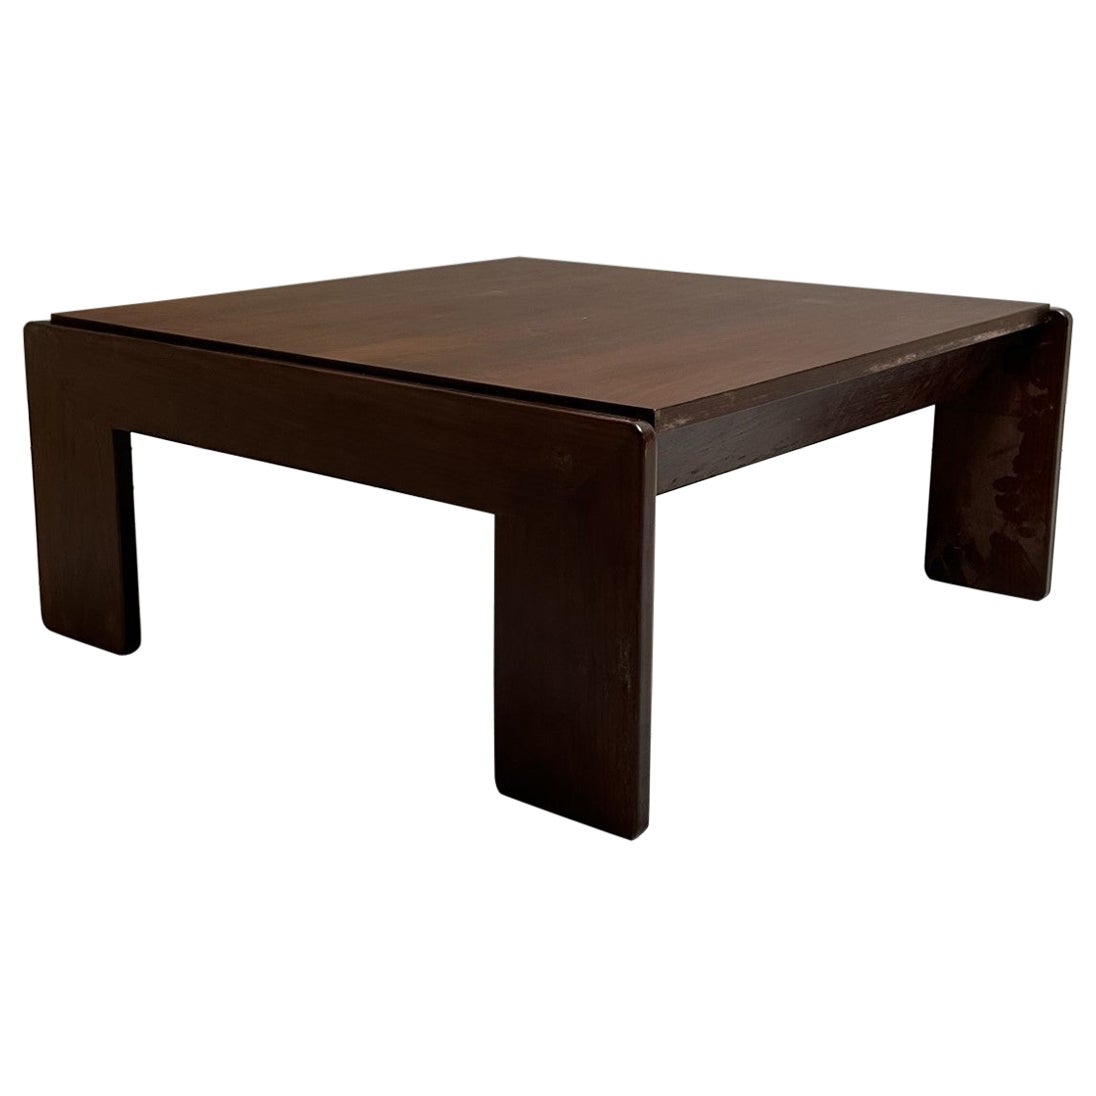 Coffee table, design by Tobia & Afra Scarpa for Gavina, Bastiano collection For Sale